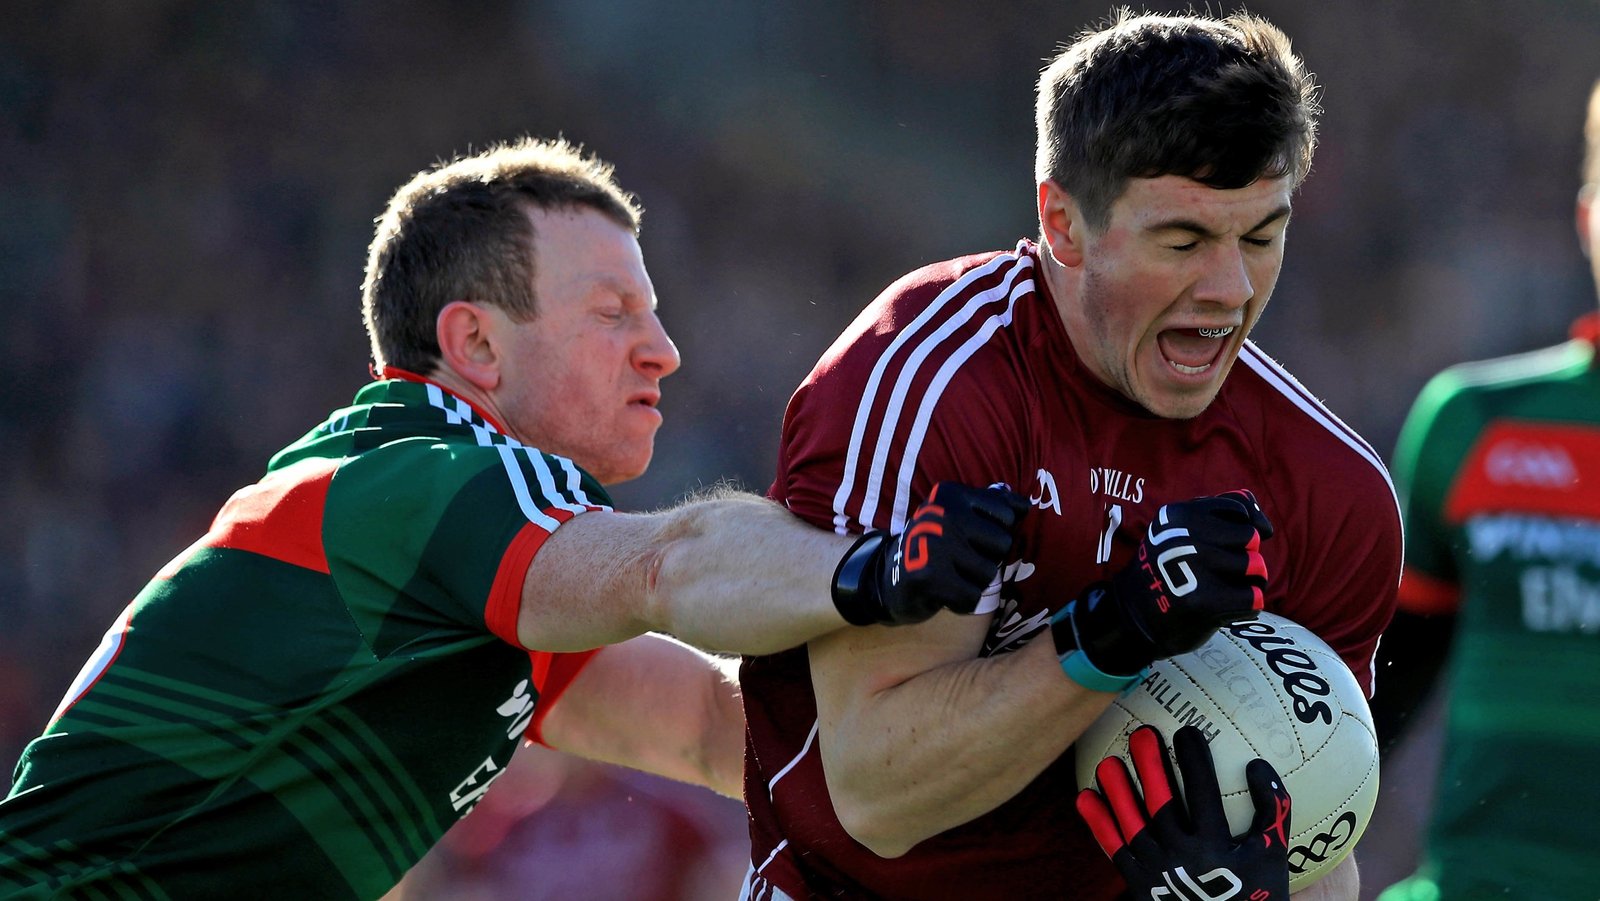 All you need to know about Mayo v Galway